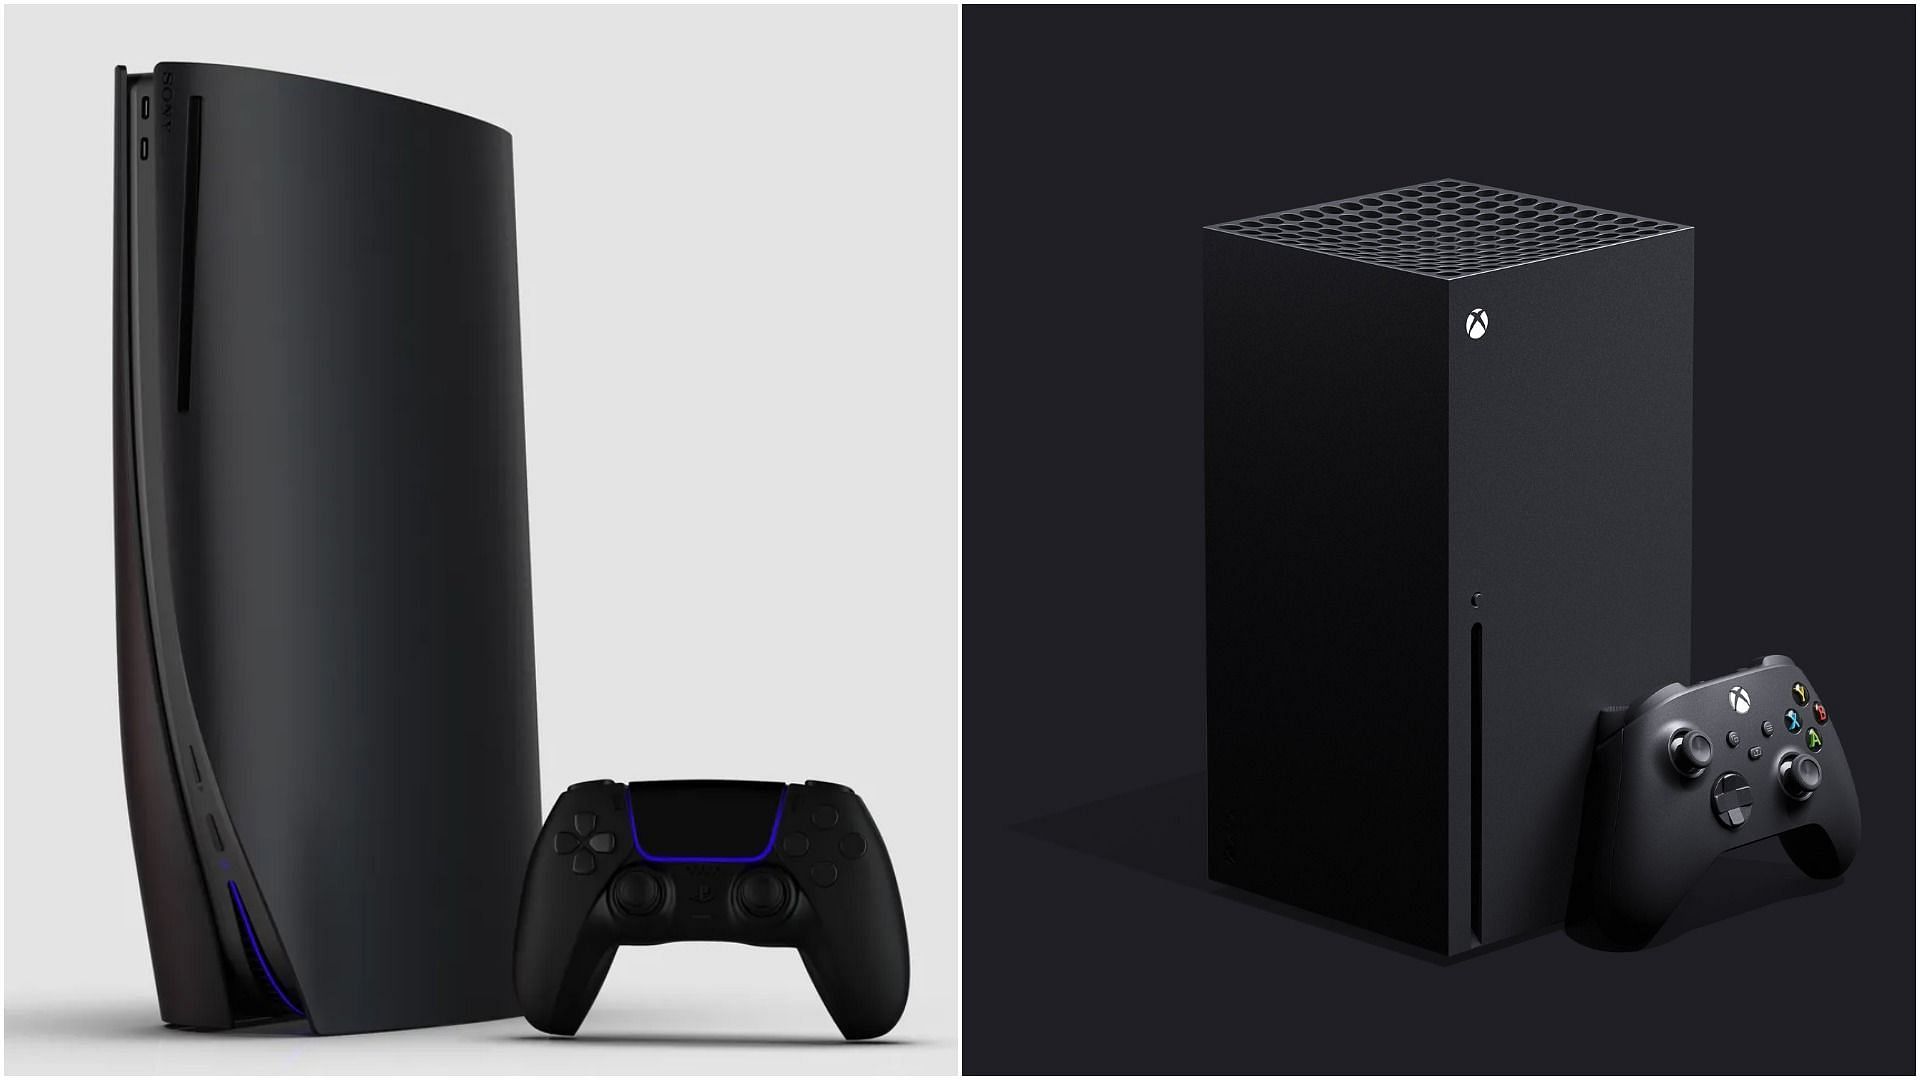 Details about upgraded versions of both have been revealed (Images via Daily Technic, Amazon)